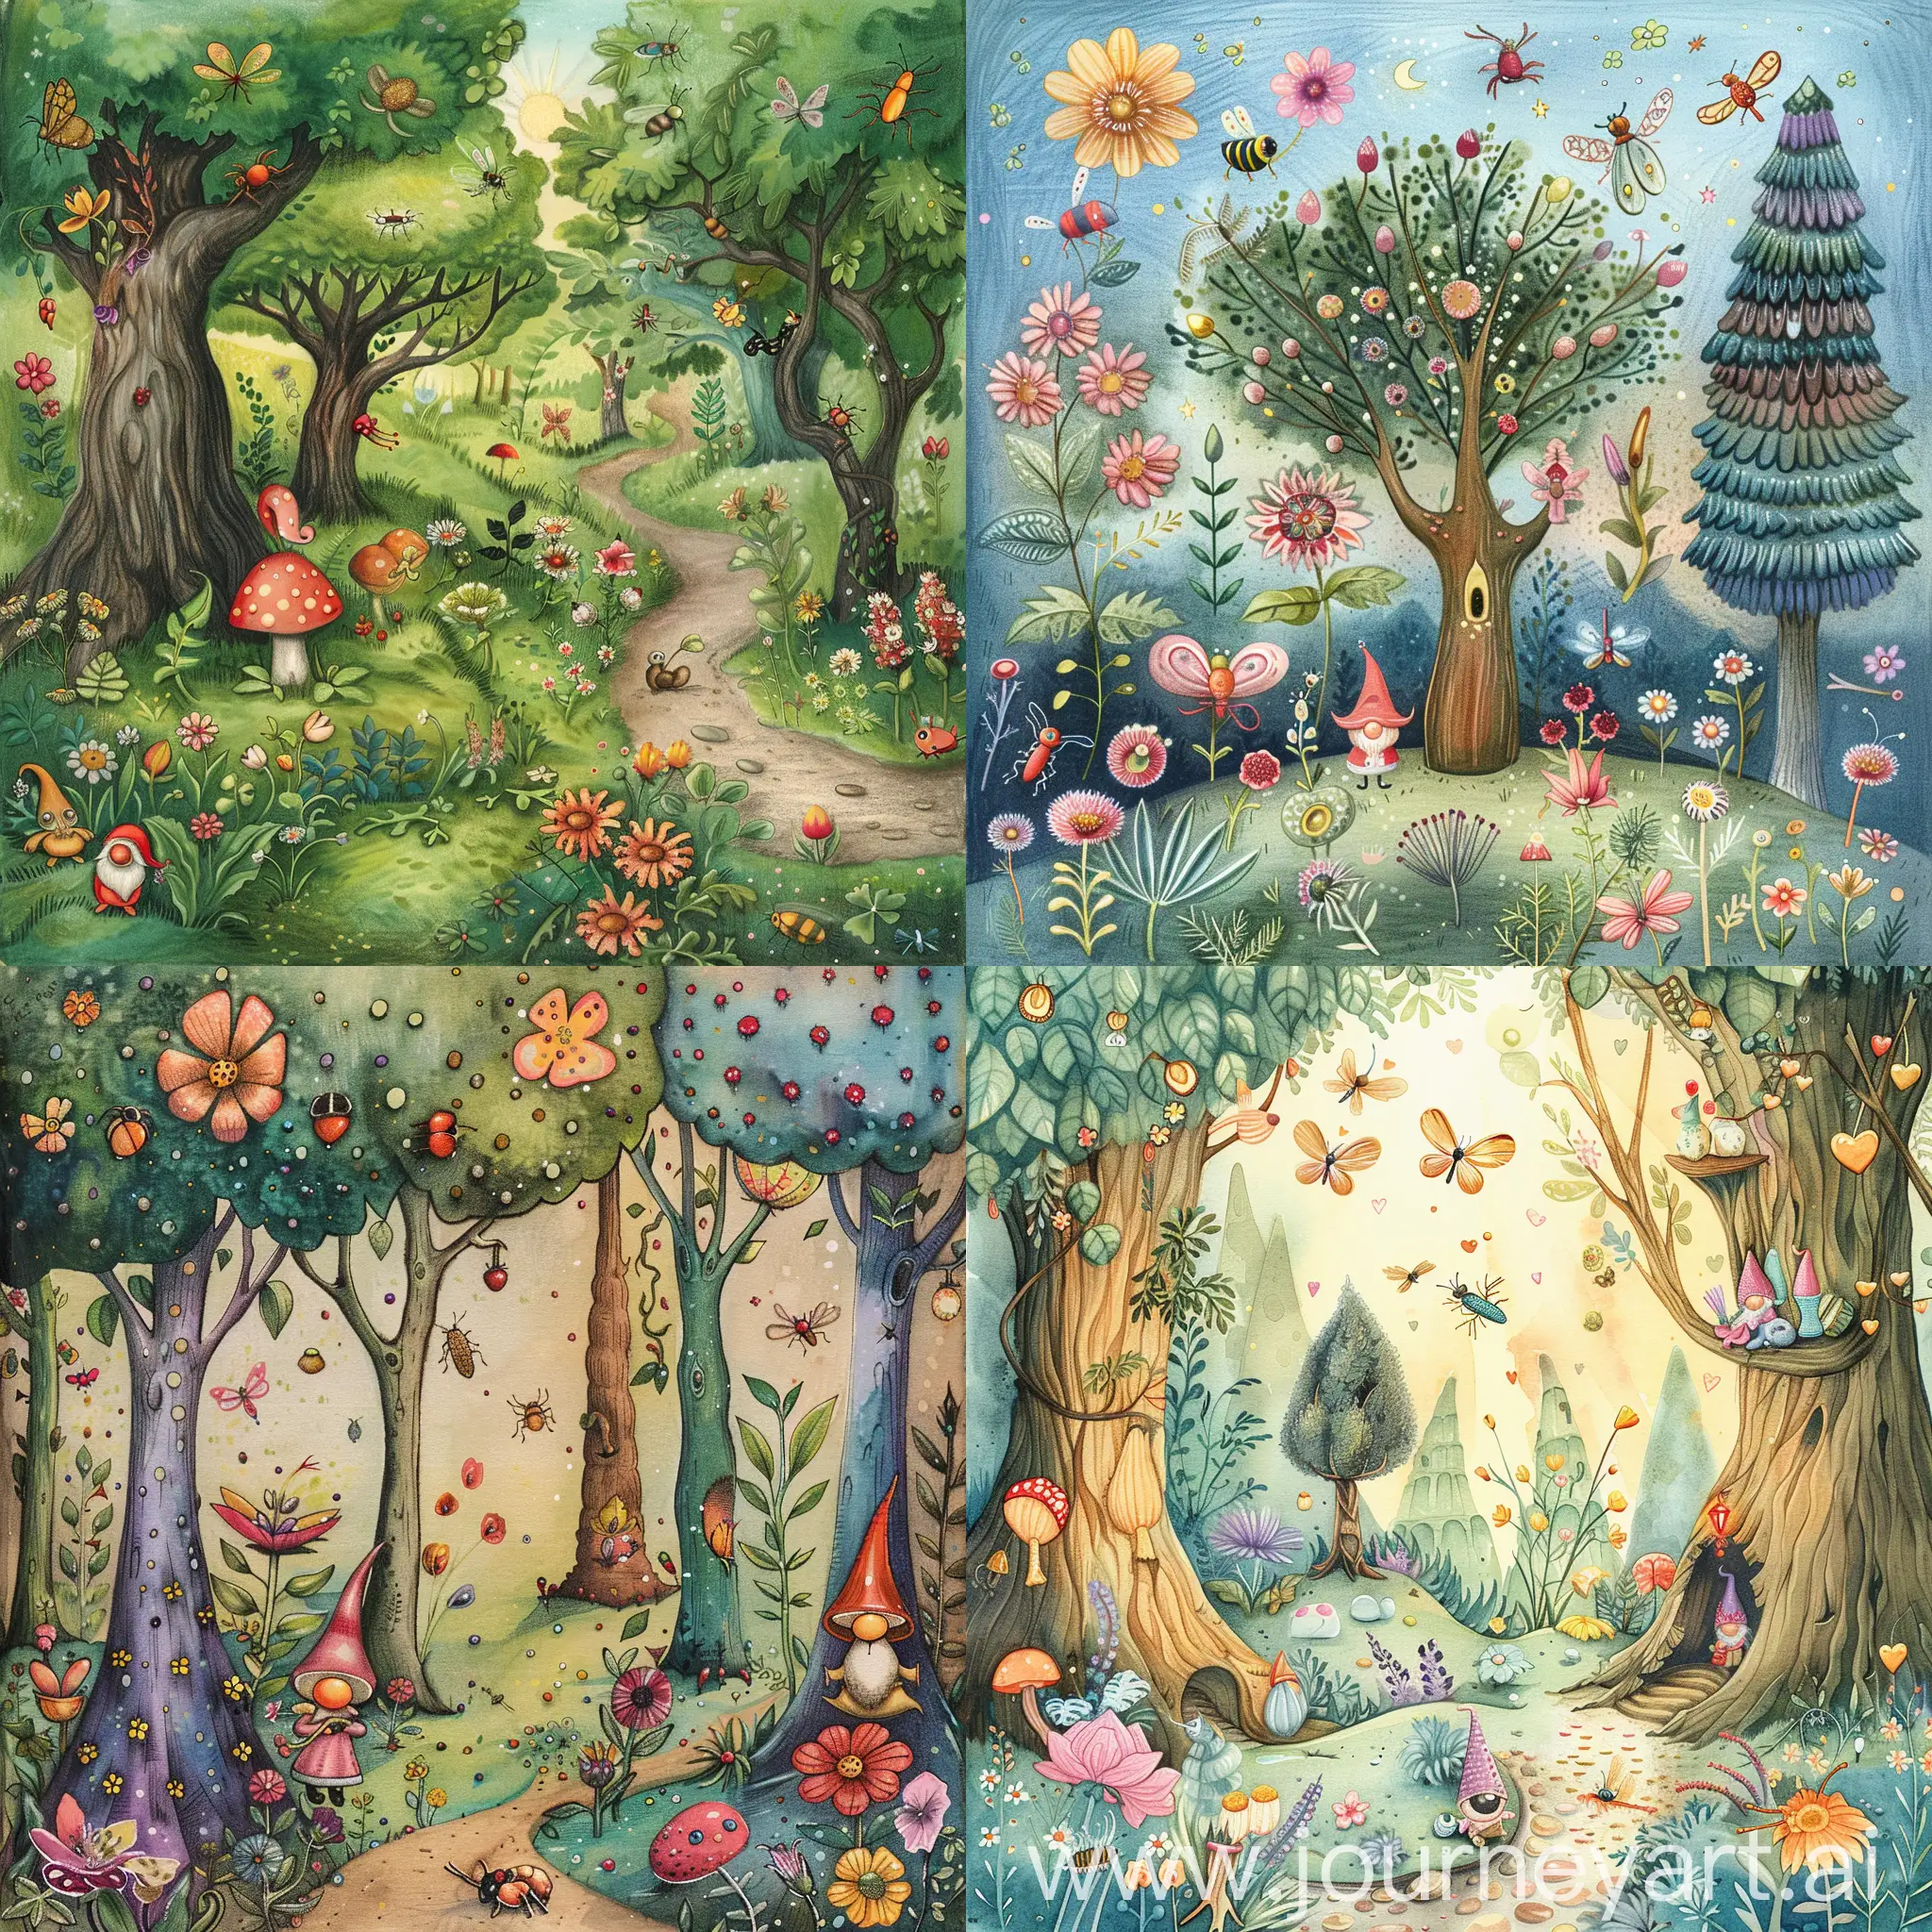 A detailed depiction of a magical story illustration for children. Immerse them in the world of a magical forest, where each picture is filled with magic, causing delight and joy. The detailed and colourful drawing of each element will create a cute and magical look of the forest that is sure to capture and inspire little viewers. Whimsical trees, cute gnomes, beautiful insects, amazing flowers